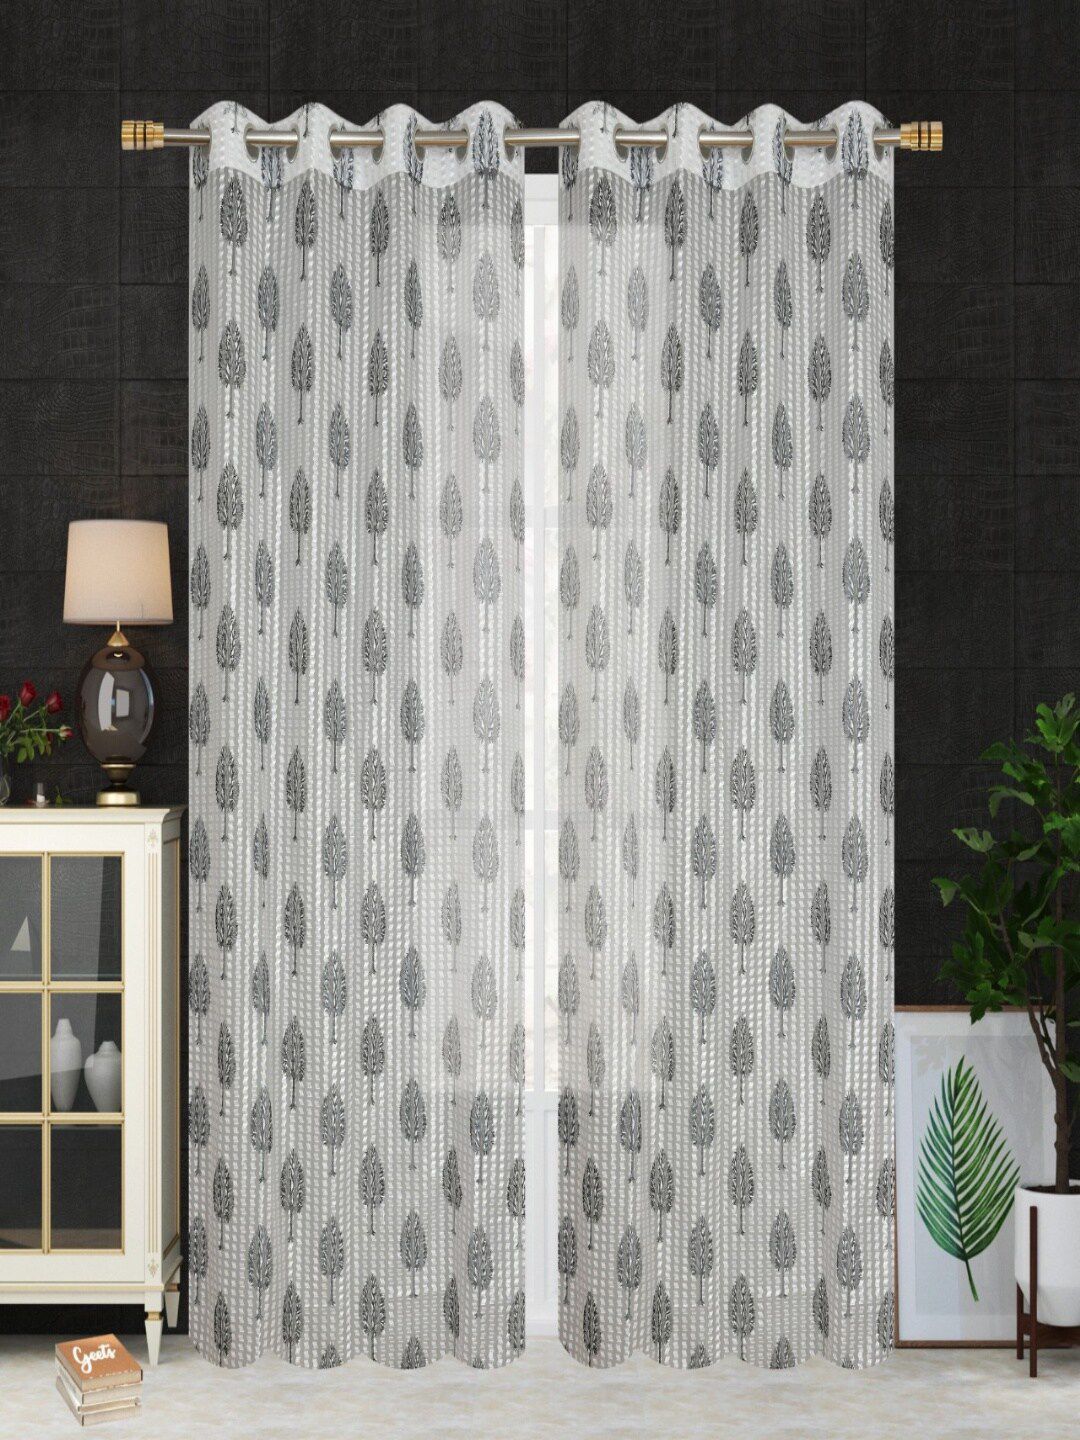 Homefab India Grey & White Set of 2 Floral Sheer Door Curtain Price in India